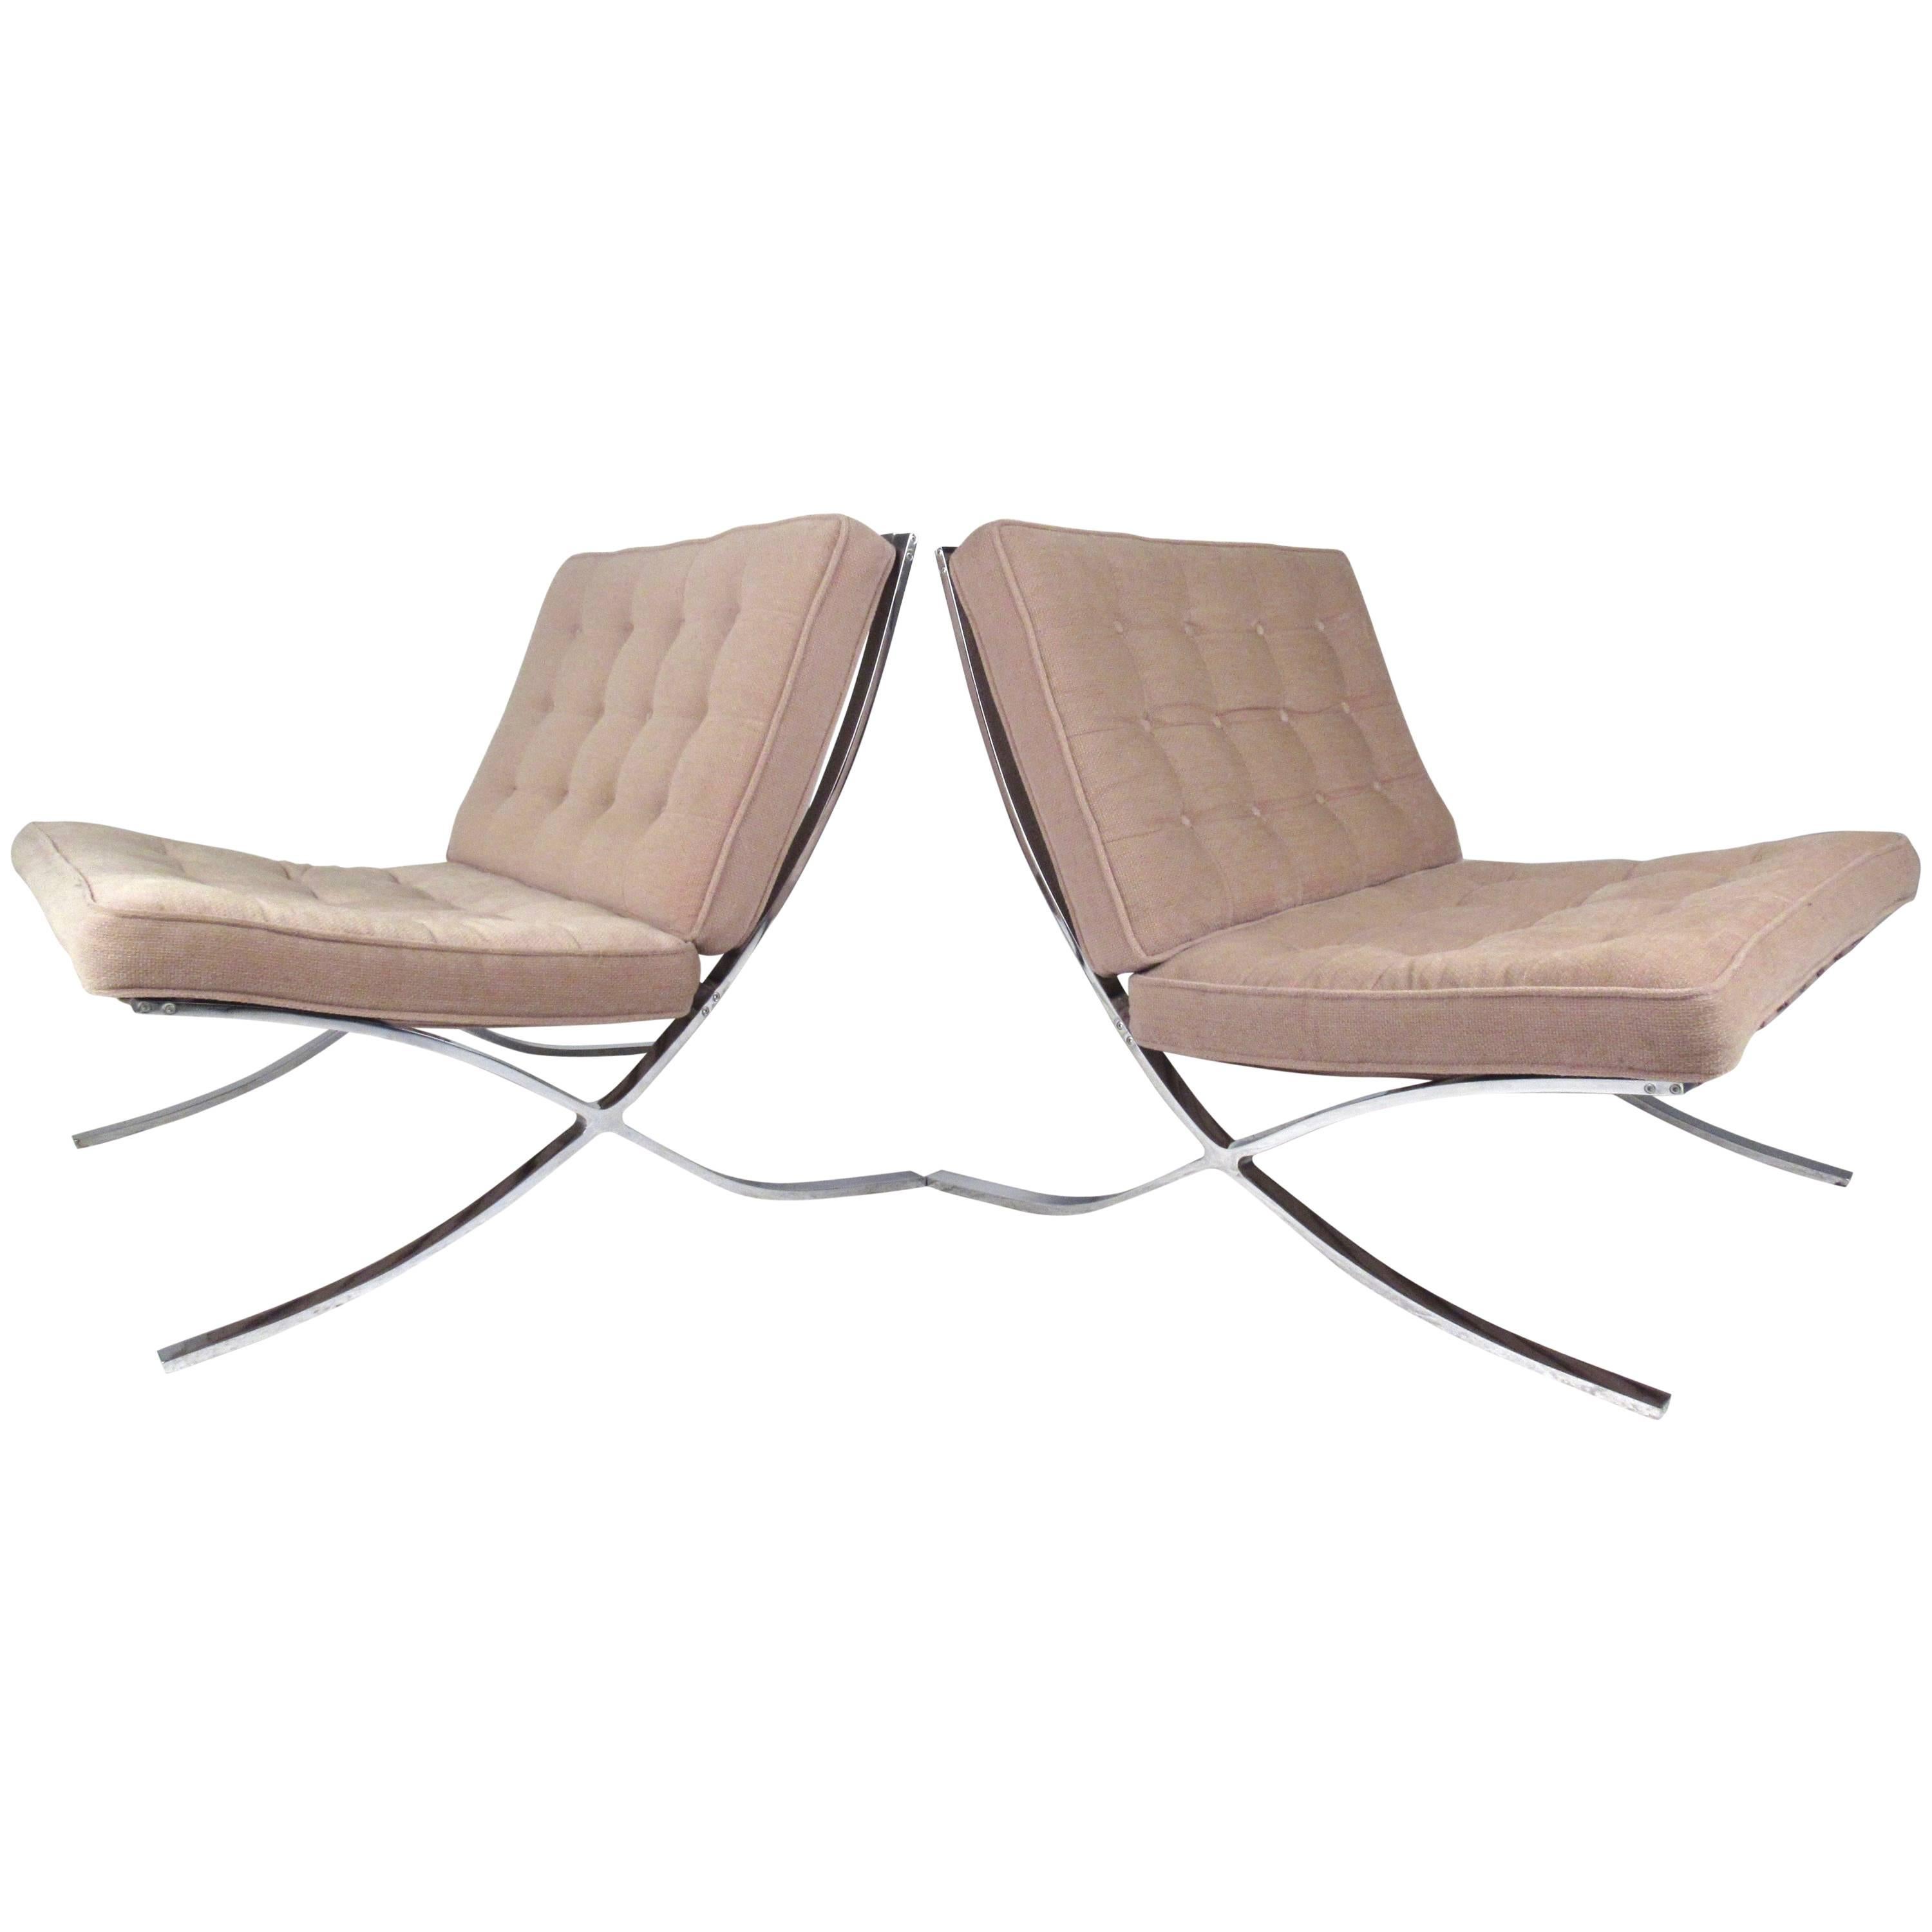 Pair of Mid-Century Modern Chairs in the Style of Ludwig Mies van der Rohe